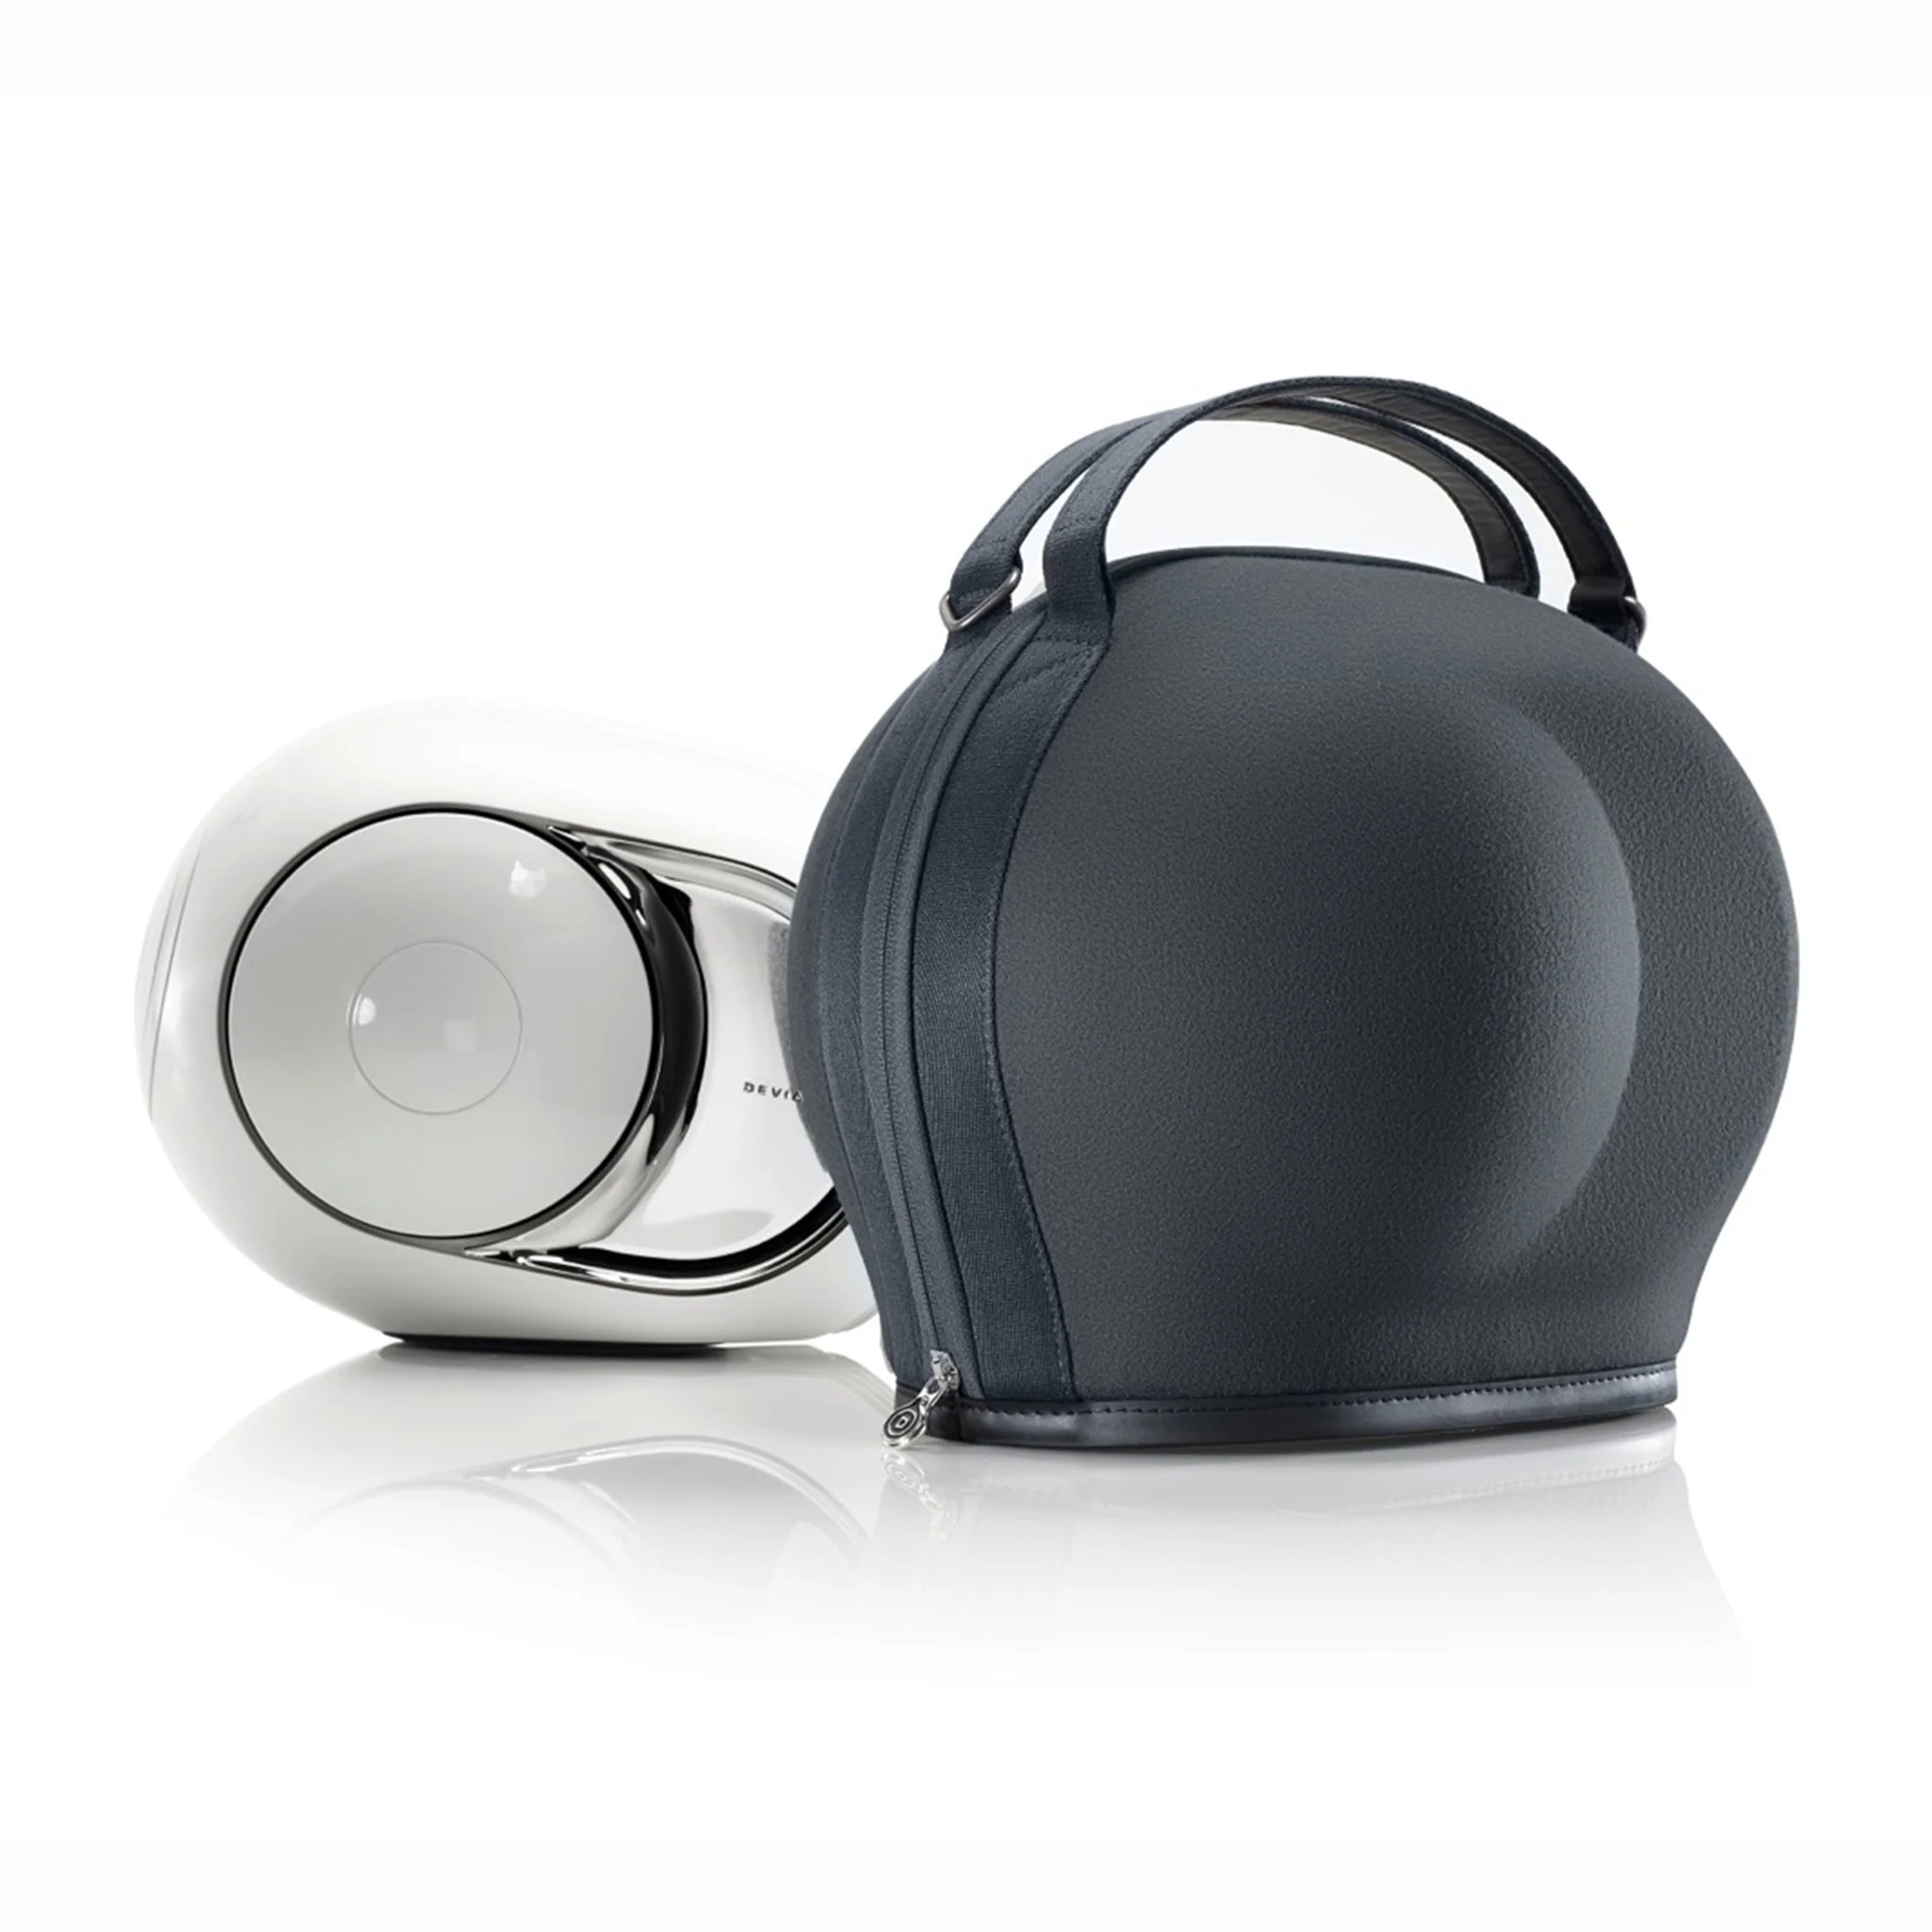 DEVIALET Cocoon - Phantom I |High Tech Carrying Case for protection, comfort and elegance when travelling| 100% French designed and made| Mercury grey